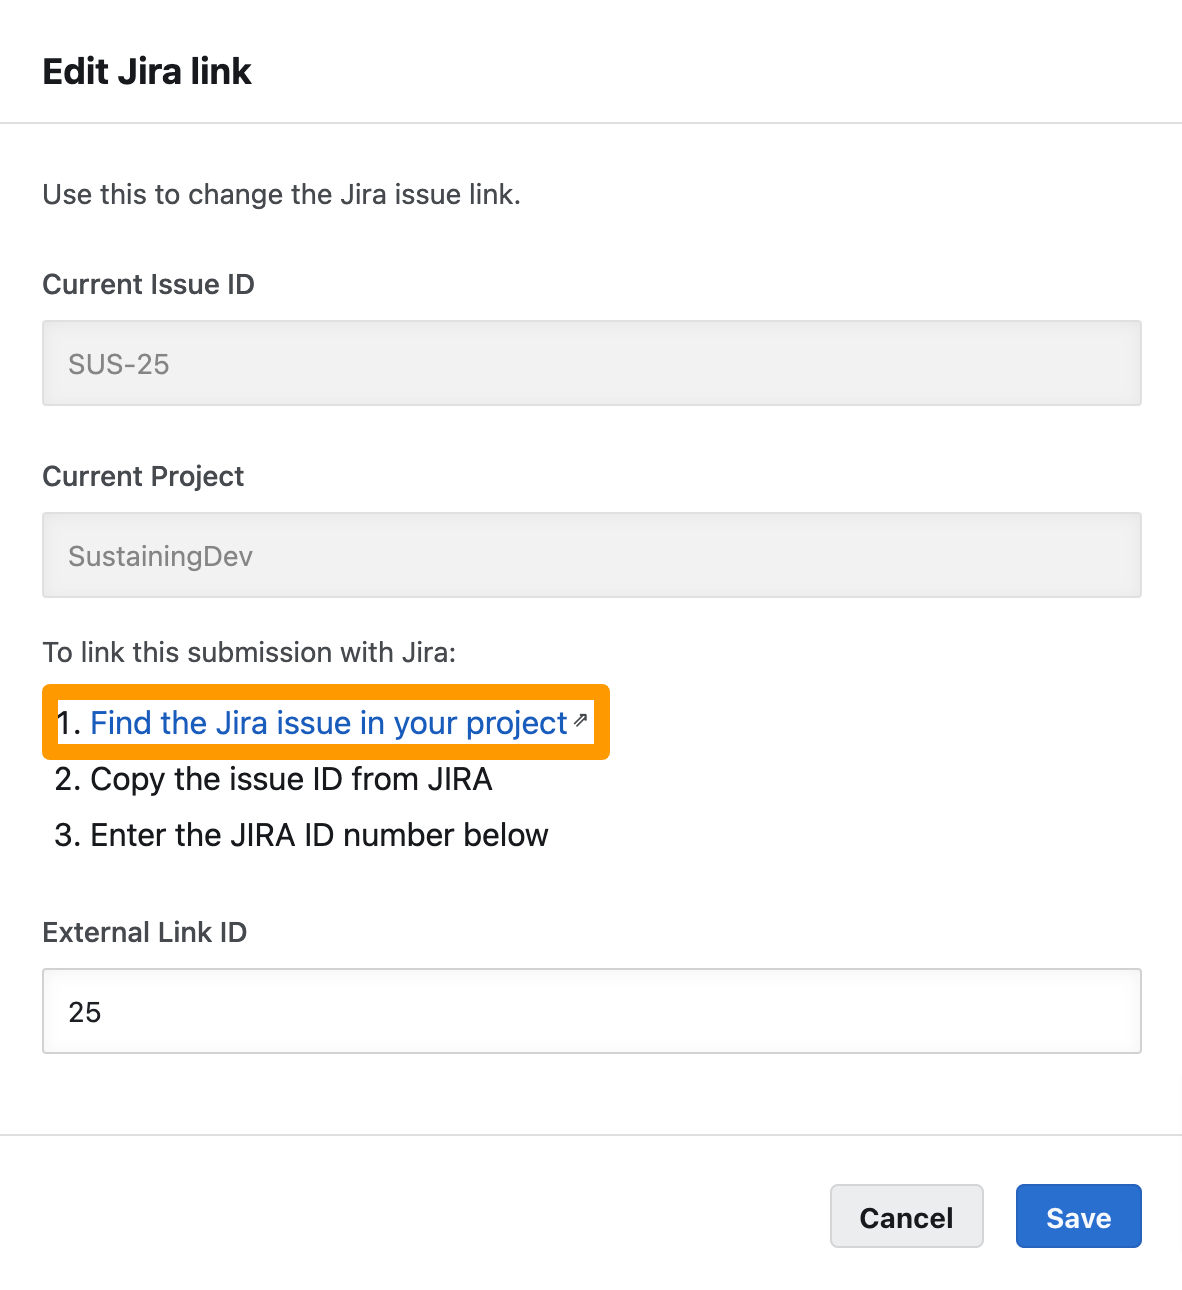 Click Find the Jira issue in your project